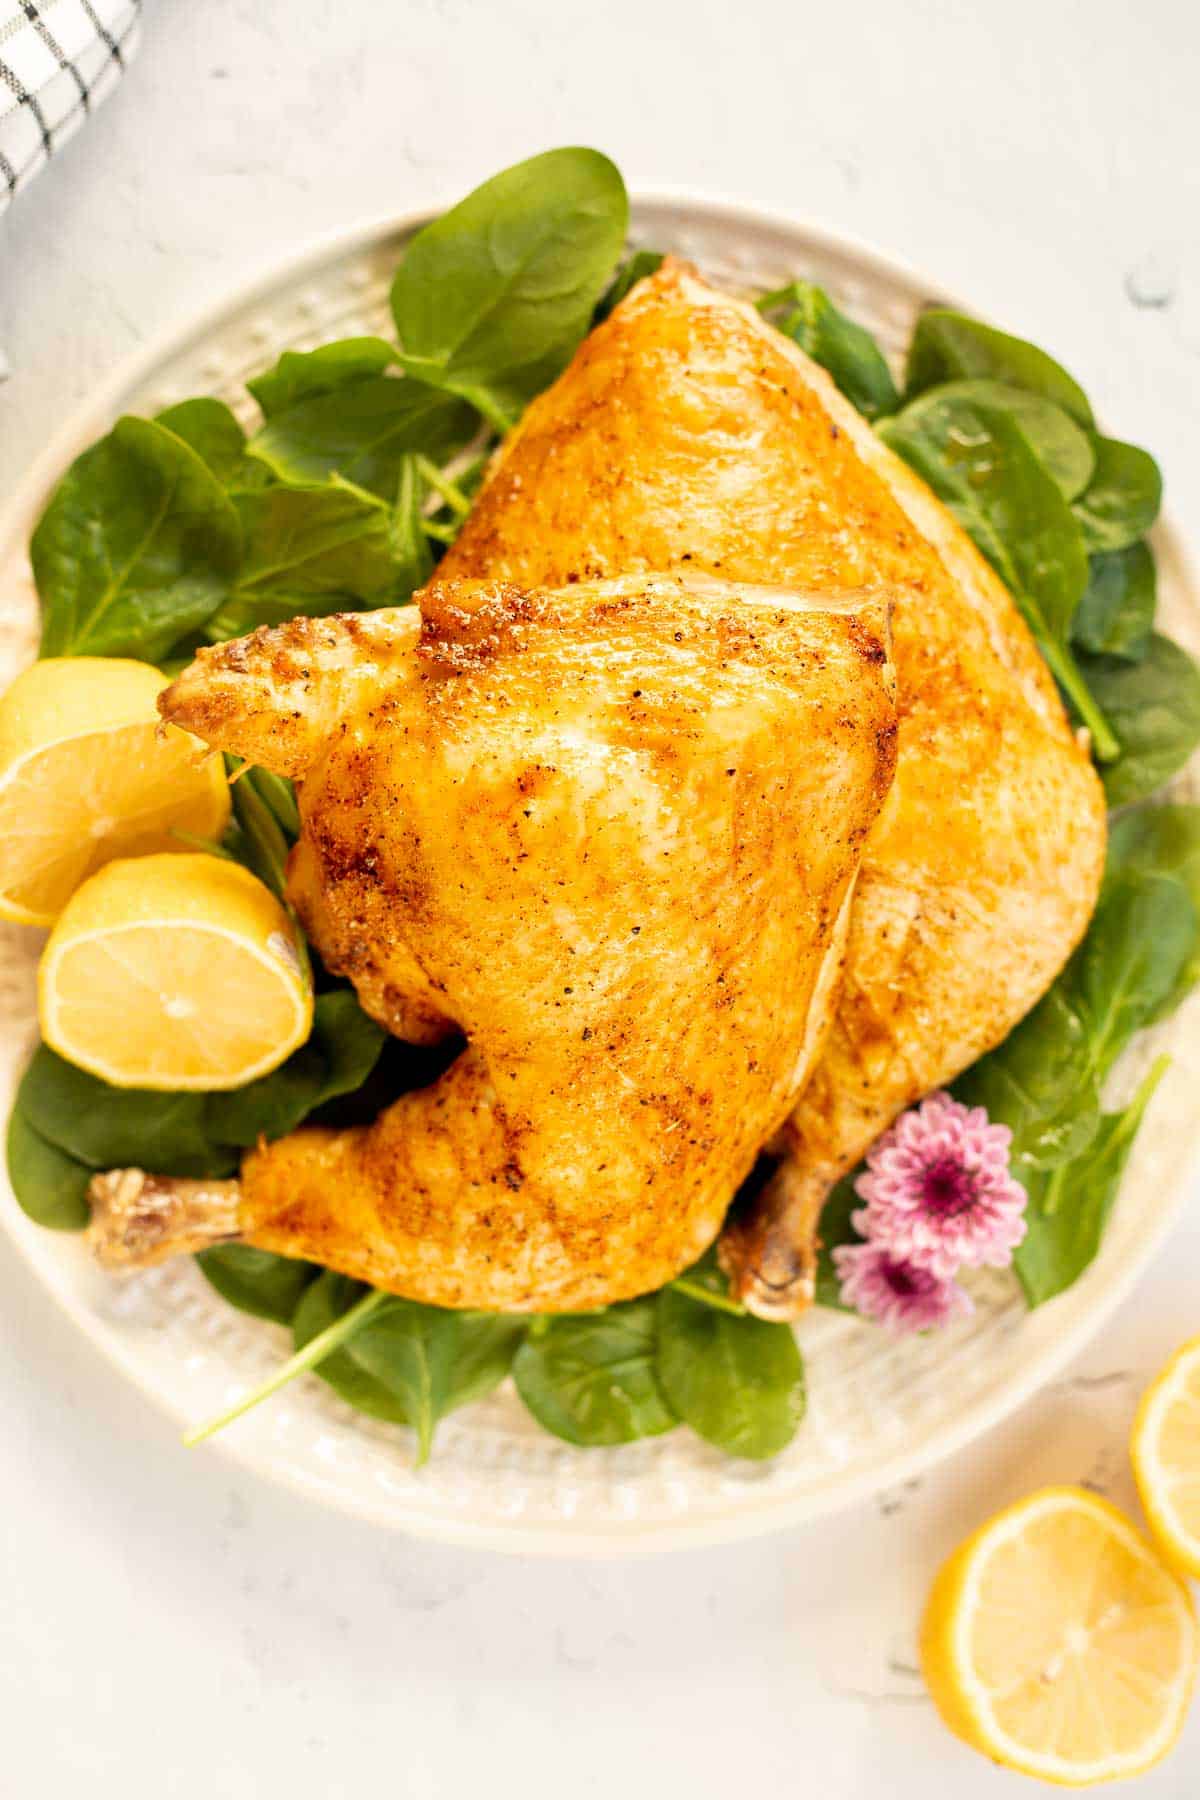 baked chicken quarters on a white plate with spinach and lemon halves.